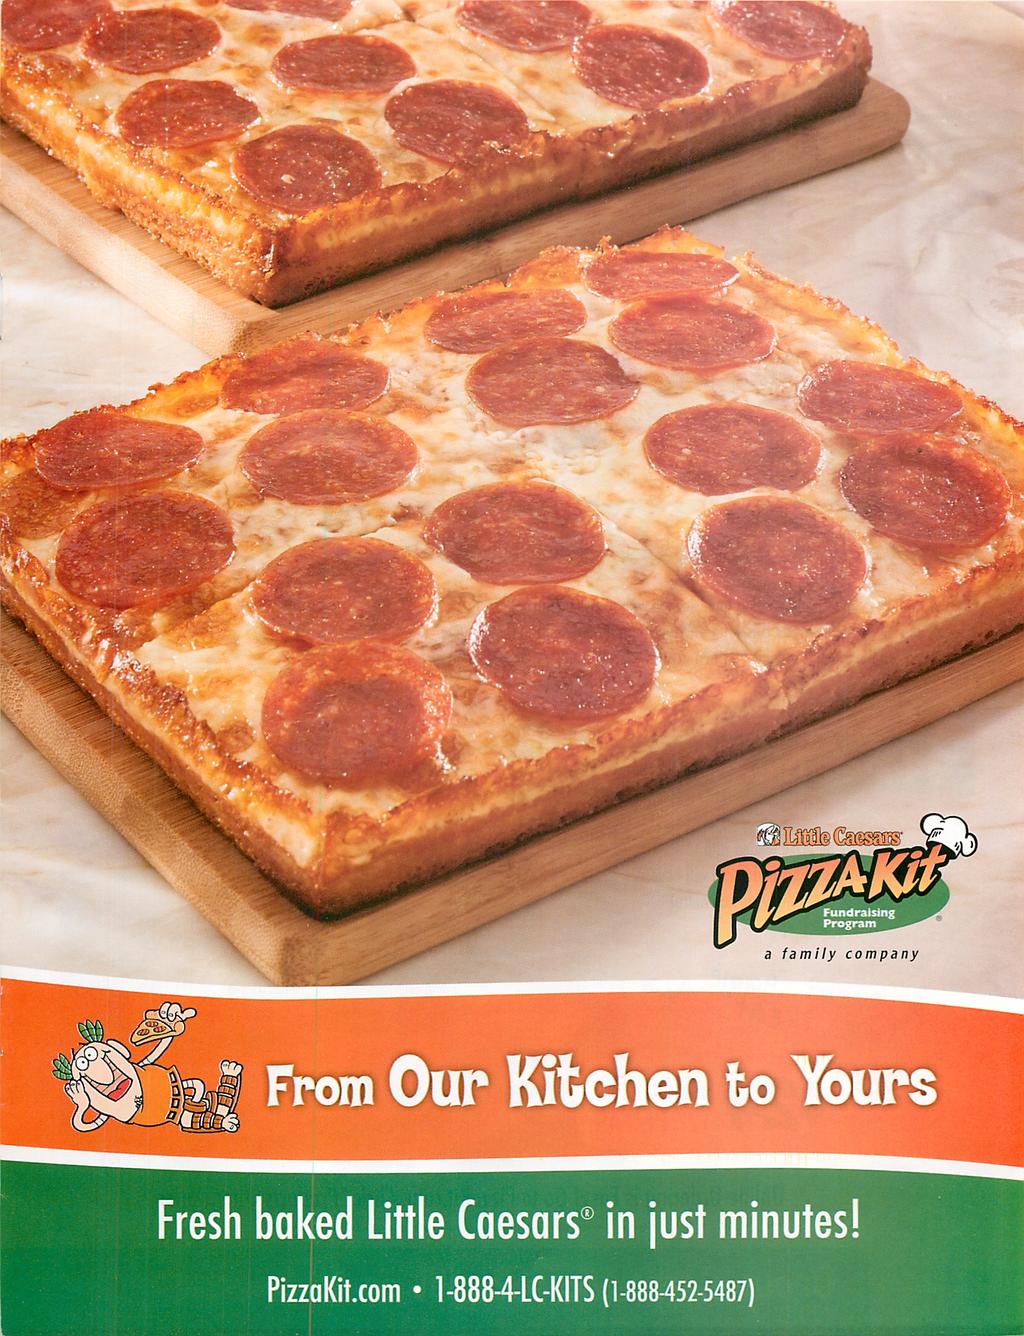 Fresh baked Little Caesars in just minutes!